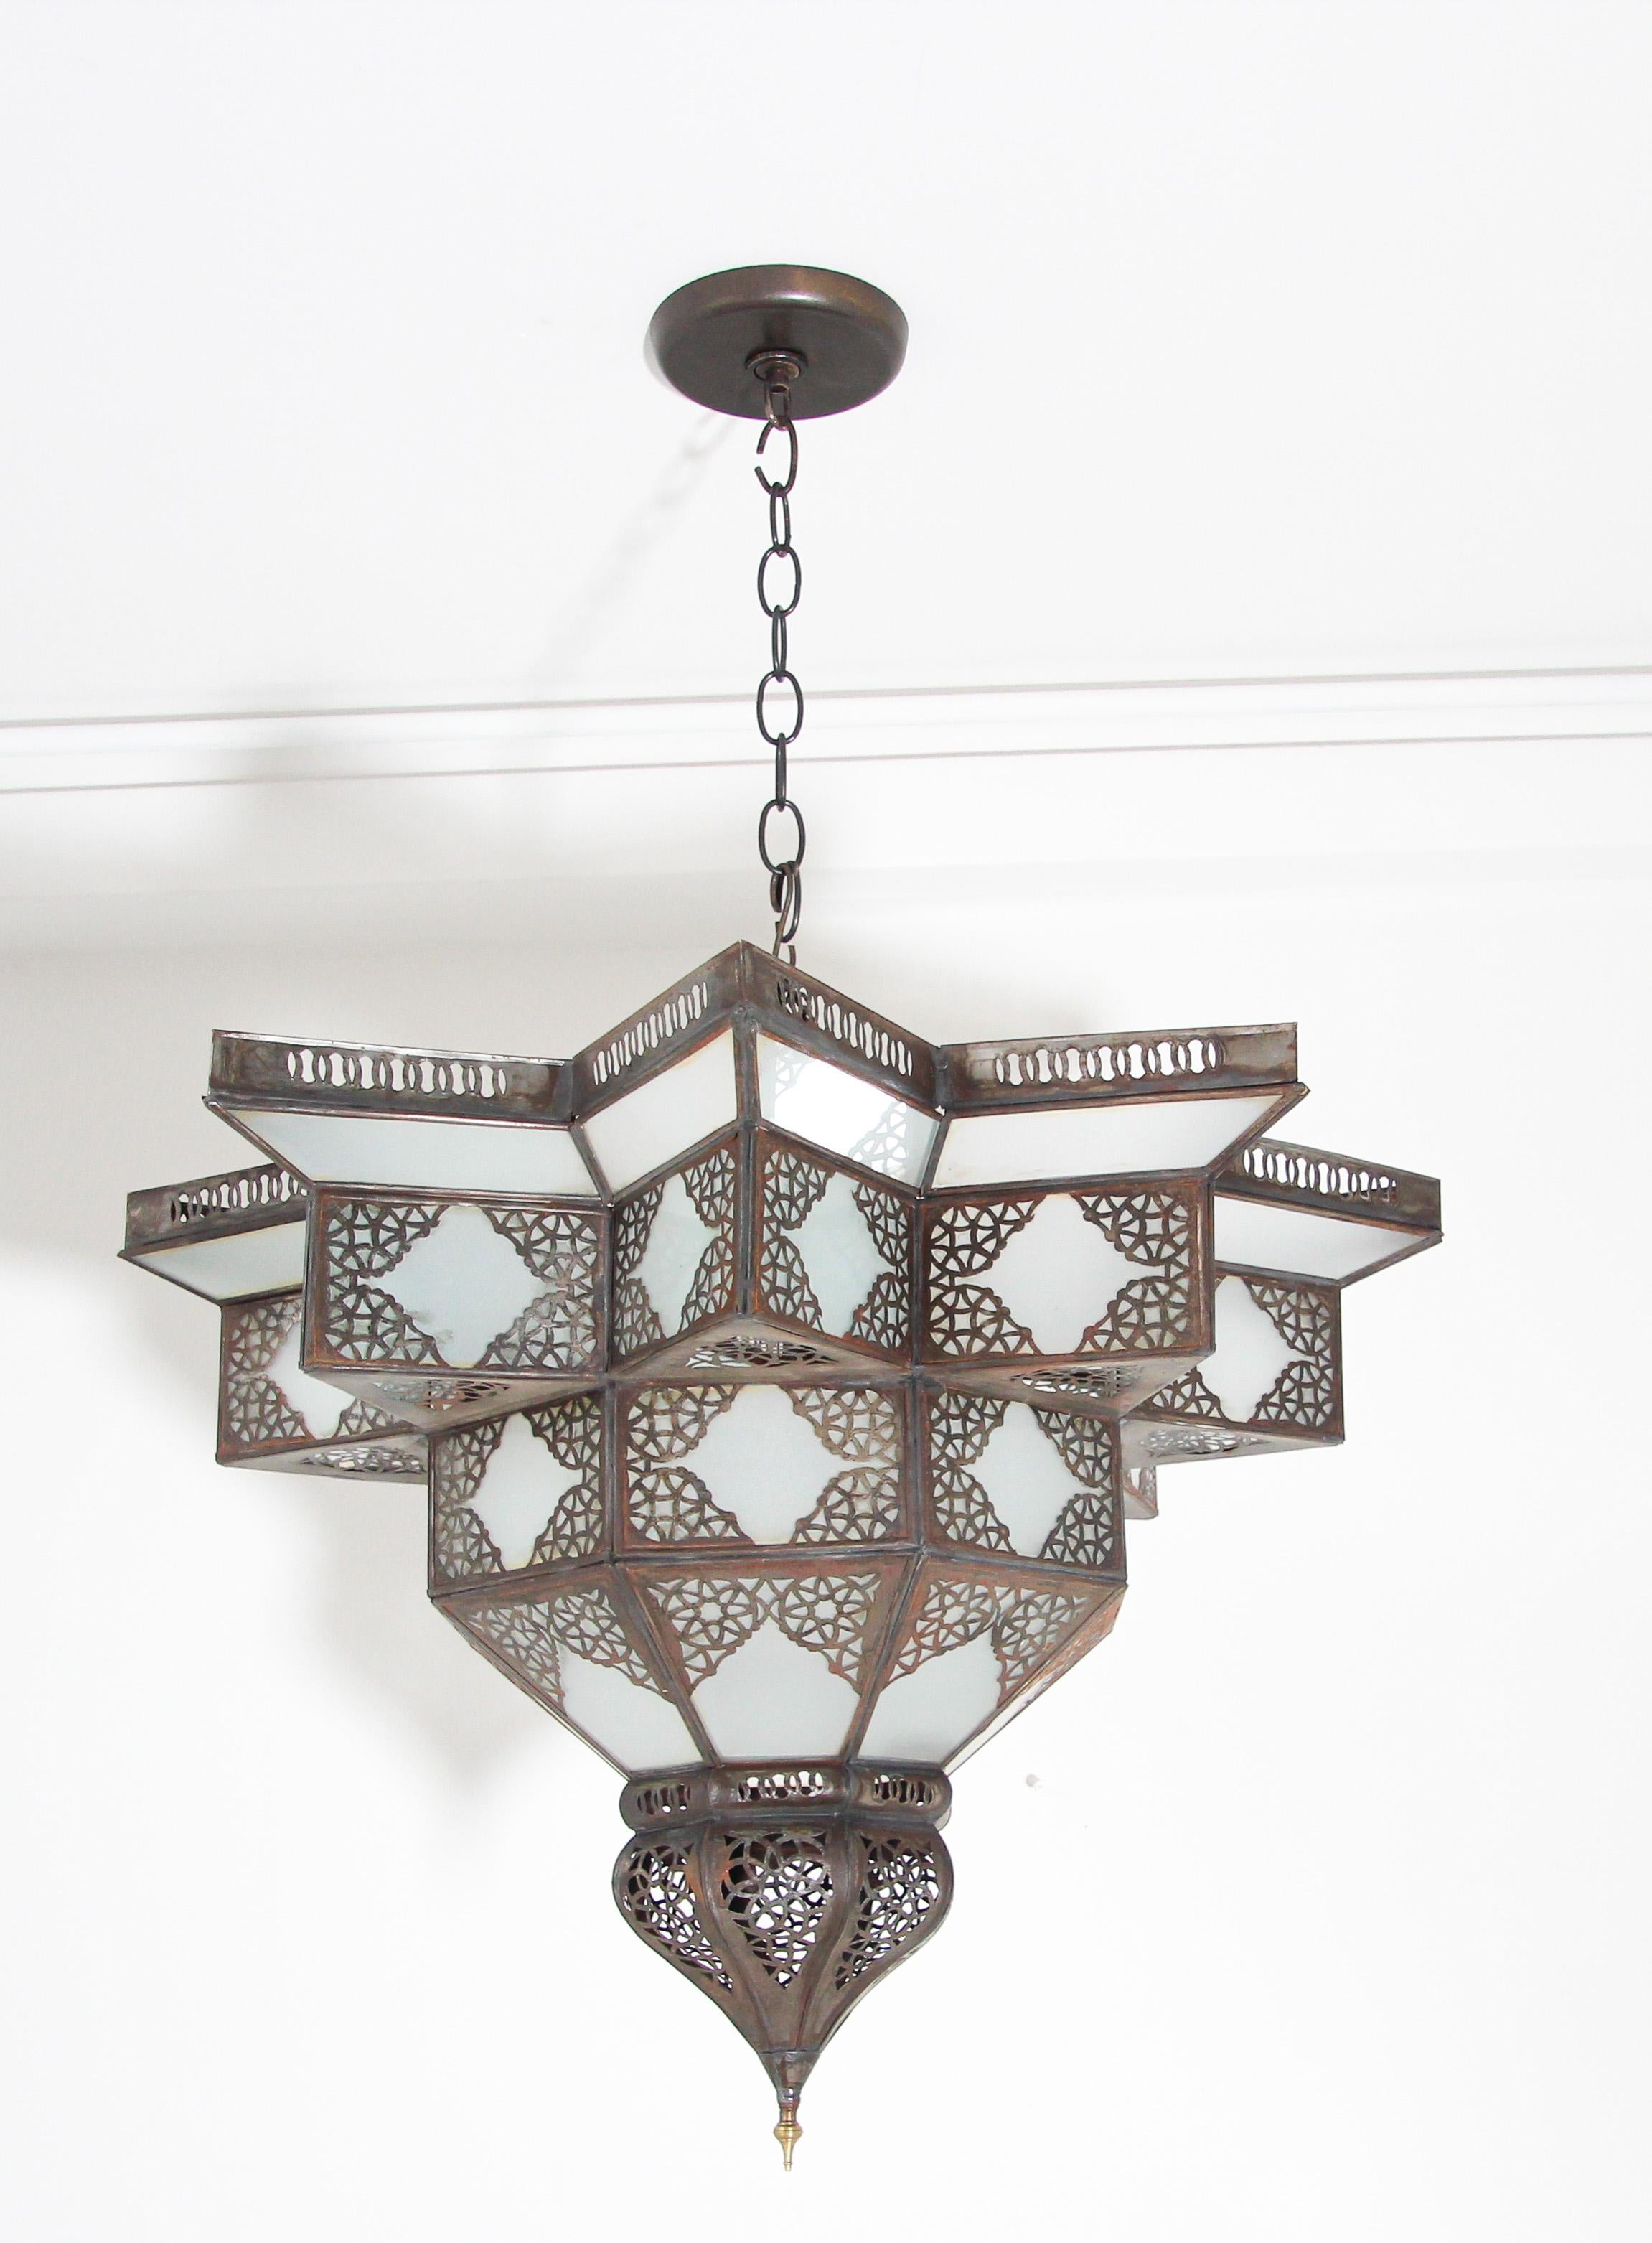 Large Moroccan hanging star pendant shade.
Large Moroccan frosted star shape glass chandelier shade
Handcrafted large Moorish Spanish style light fixture with a metal frame and frosted milky glass with delicate Islamic filigree metal work.
Shade